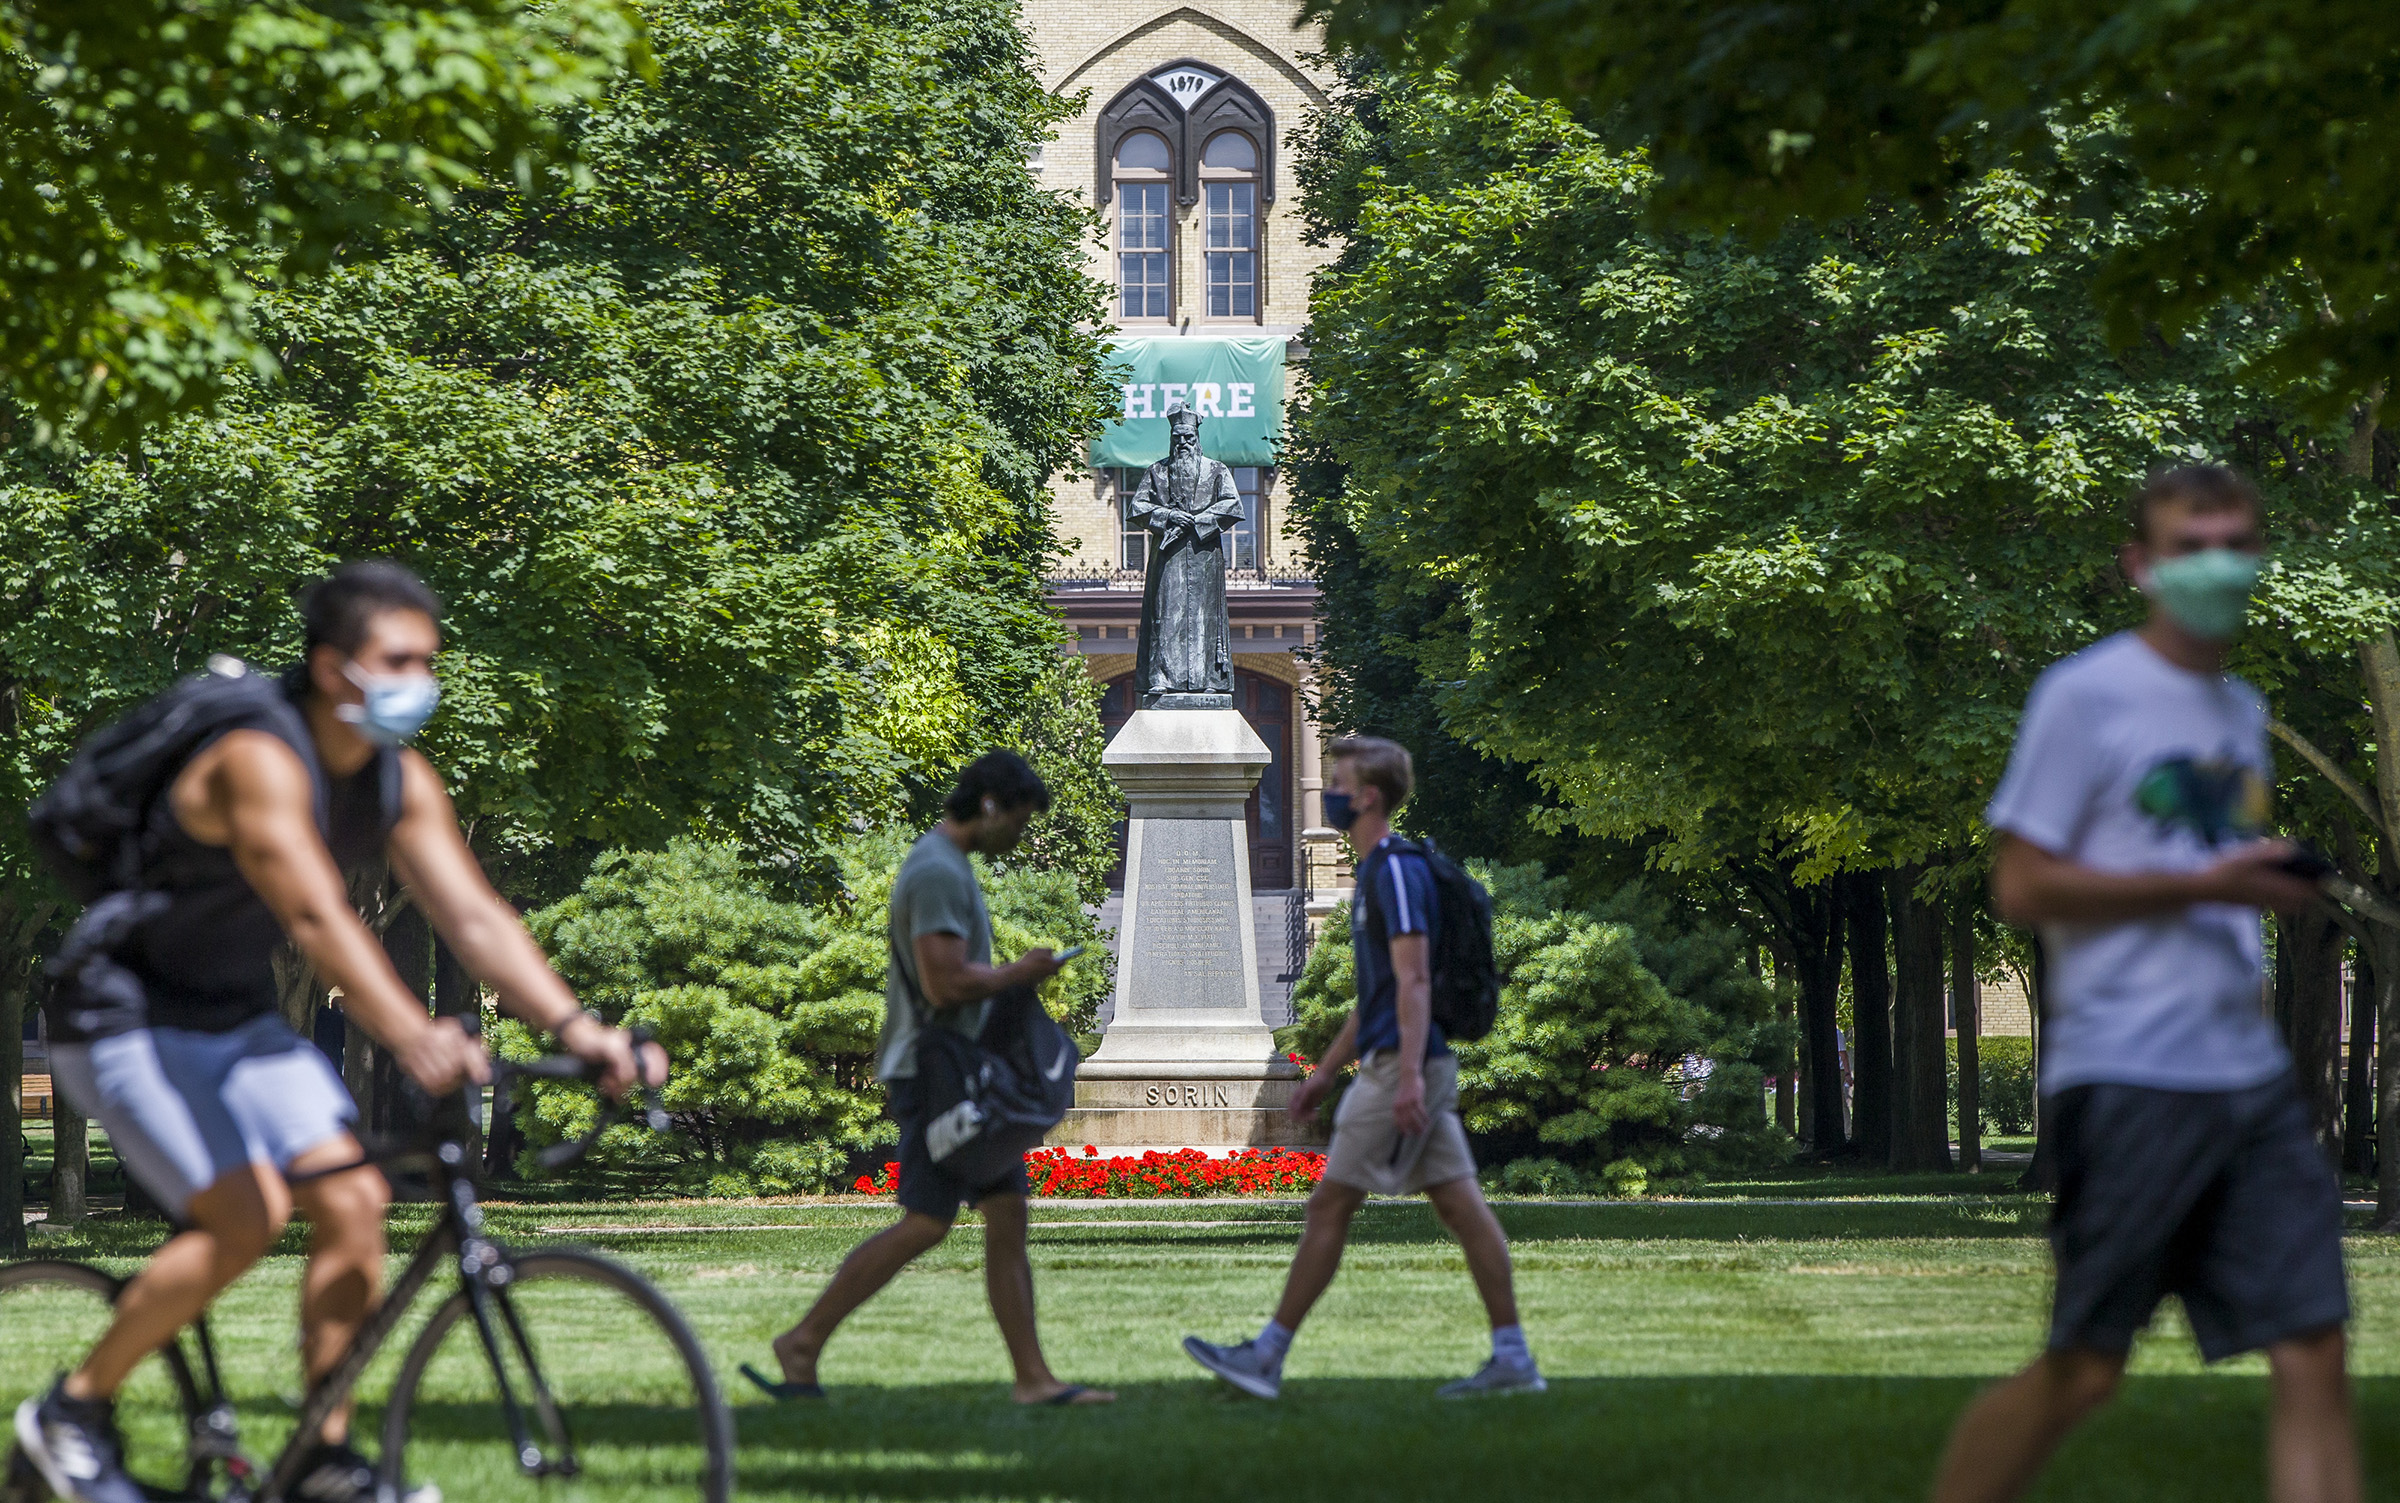 Students return to Notre Dame's campus for the fall semester, in South Bend, Ind. on August 7, 2020. (Robert Franklin—South Bend Tribune/AP)